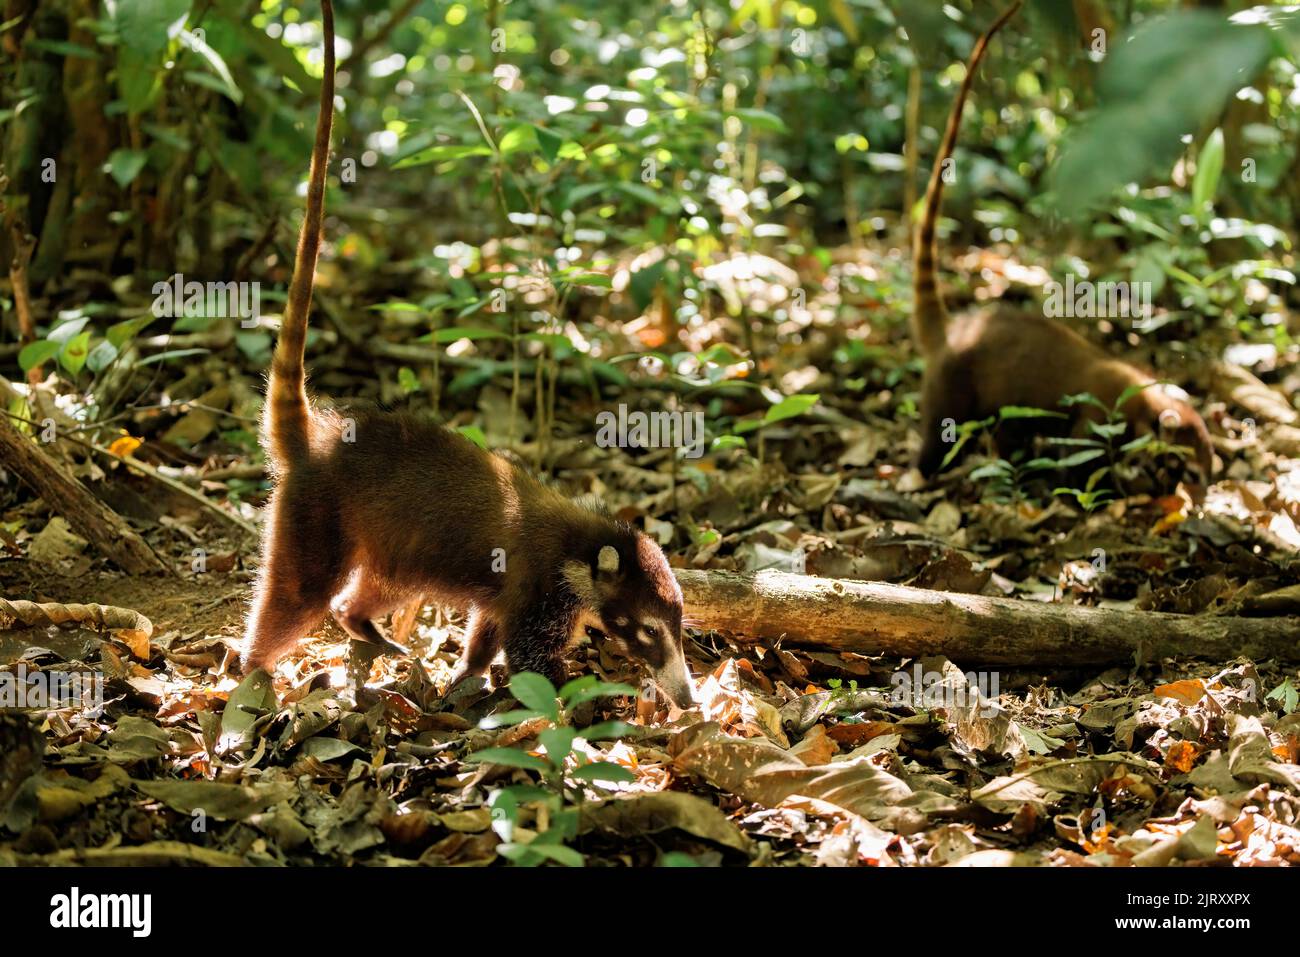 Coatis (Nasuella) roaming in the Corcovado national park rainforest looking for food among the fallen leaves, Osa peninsula, Costa Rica Stock Photo